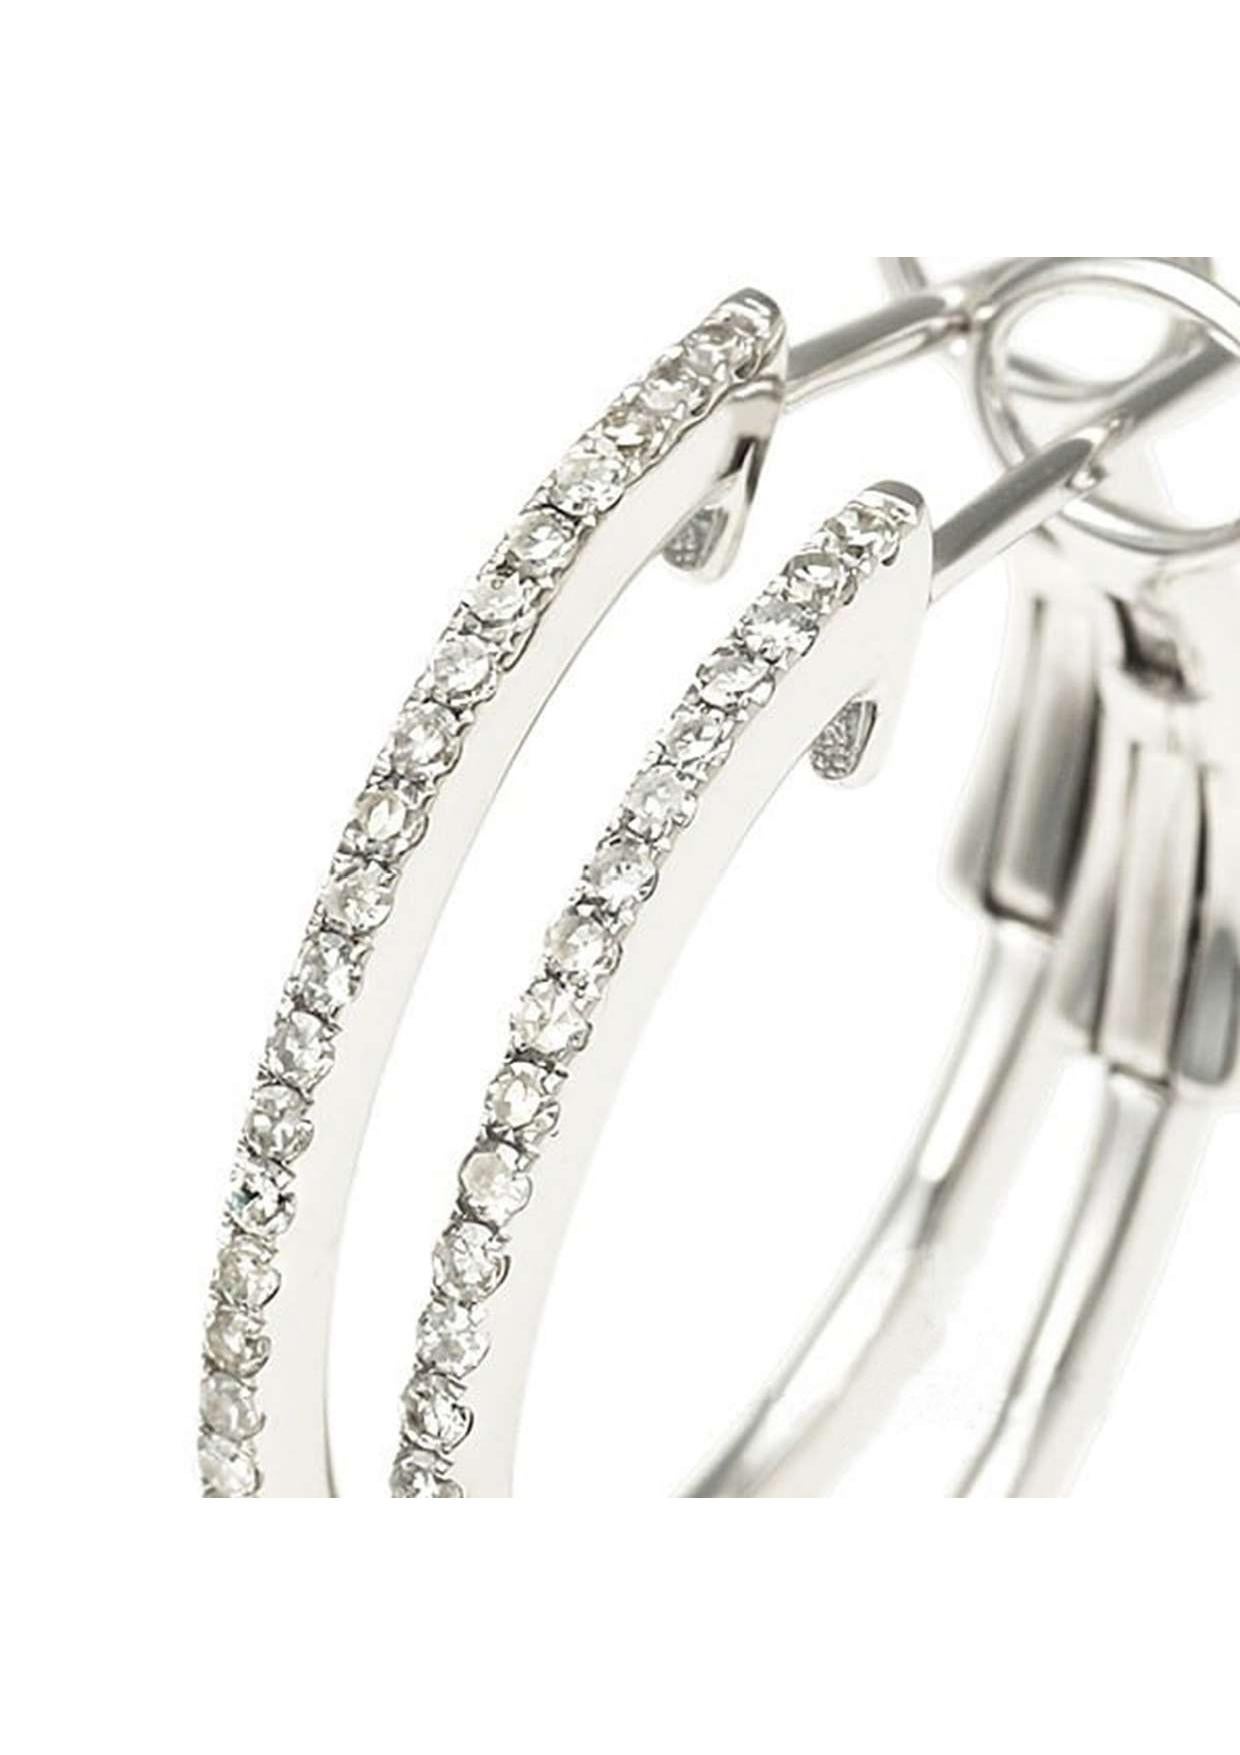 Adorn your ears with these stunning 18K Yellow Gold Diamond Hoop Earrings, featuring sparkling diamonds totaling 0.19ct.

Details:

* SKU: cin416
* Material: 18K Yellow Gold
* Jewelry Type: Earrings
* Size: Approximately 20.5mm x 1.1mm
* Diamond